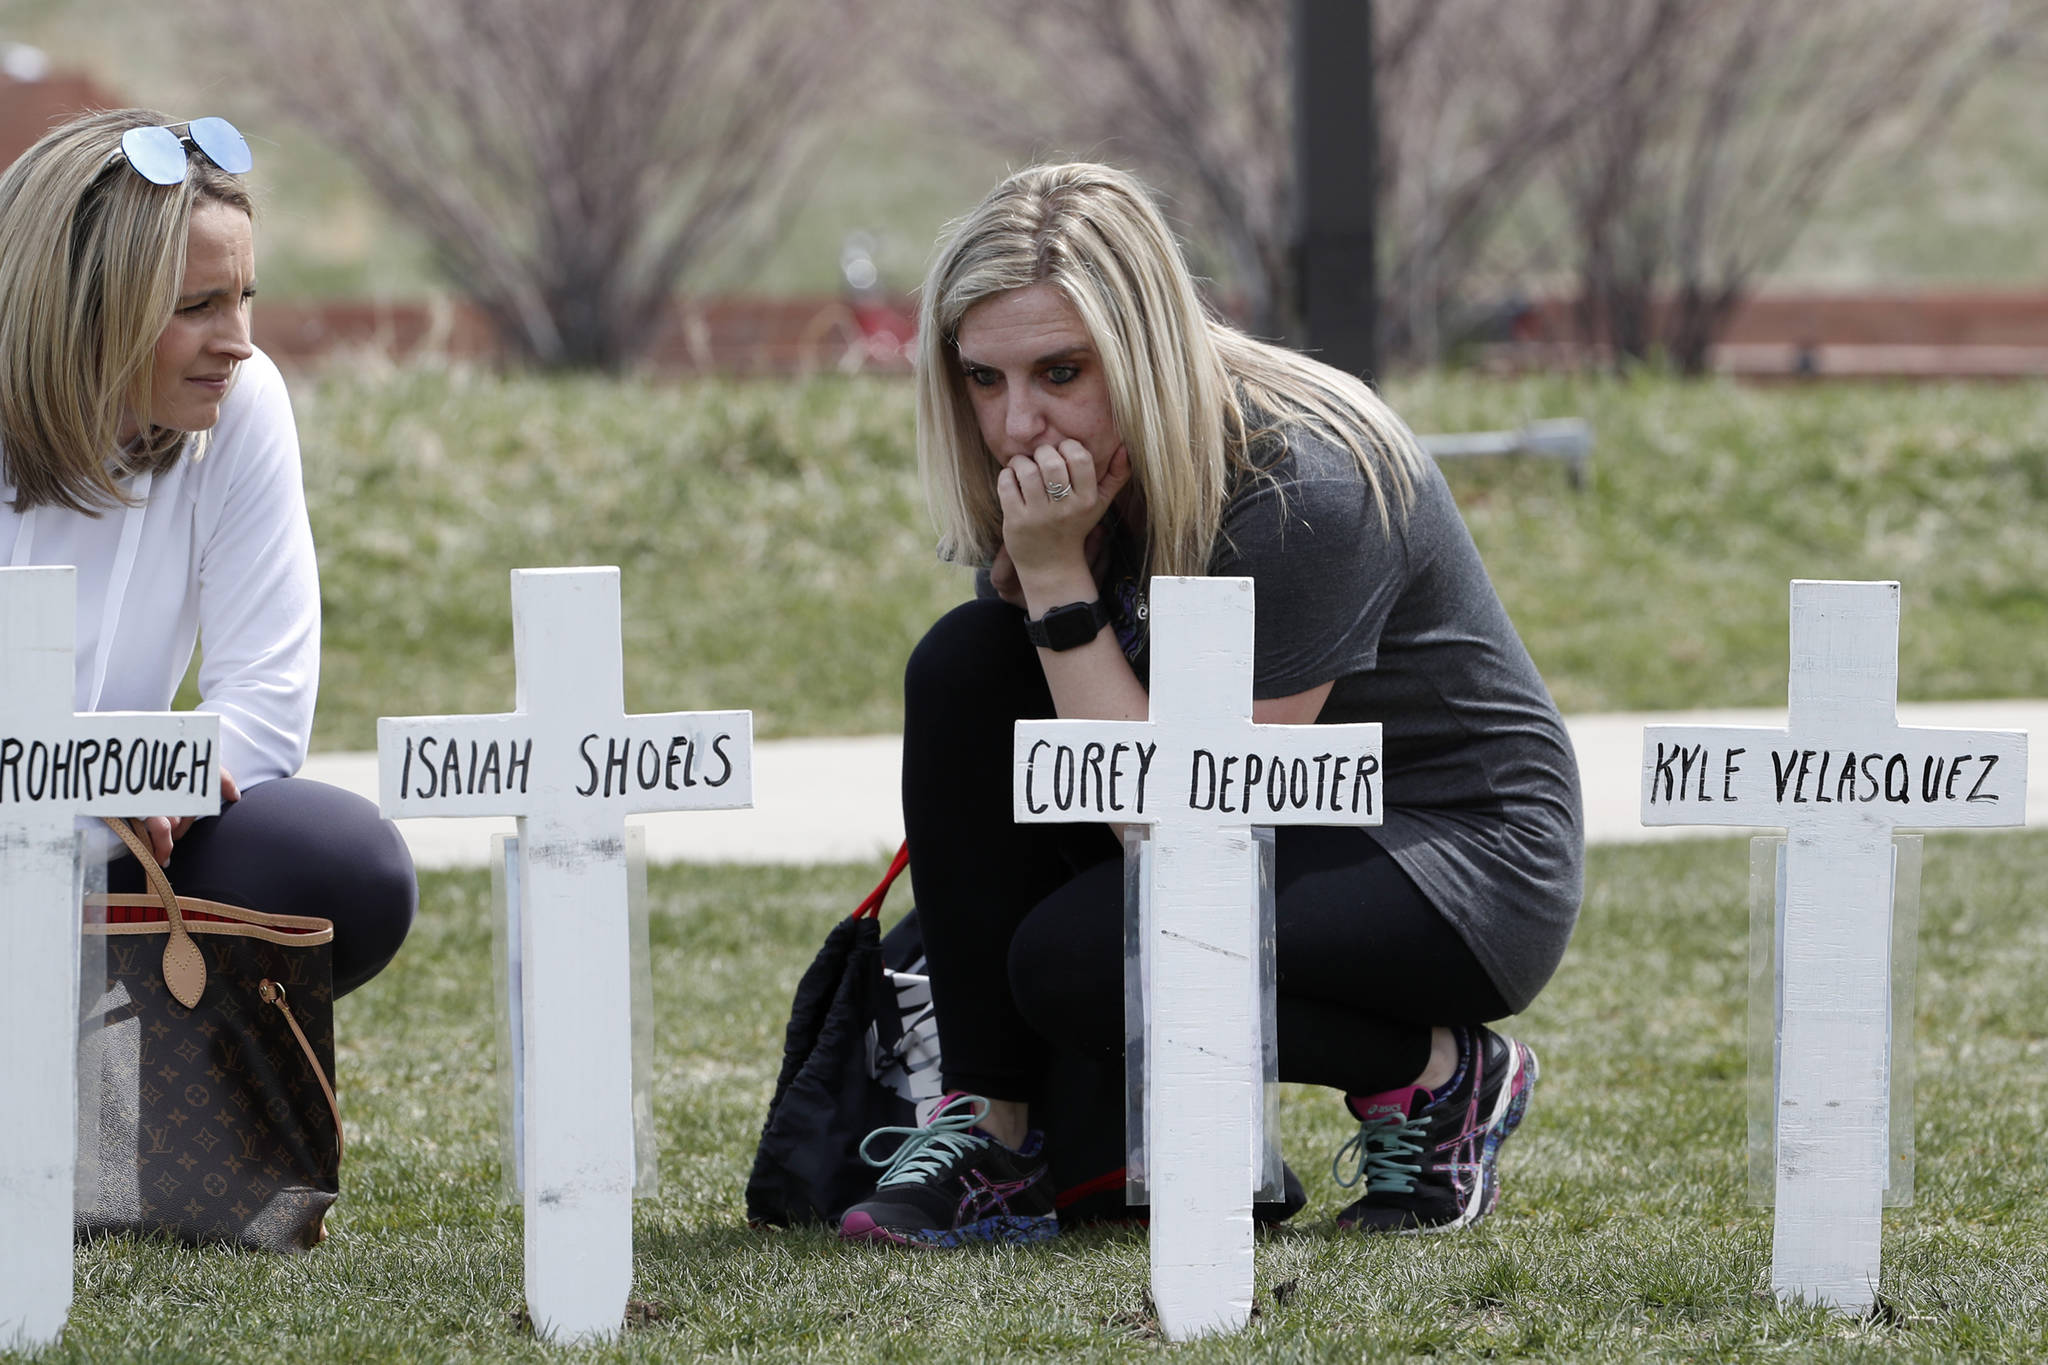 Cassandra Sandusky, right, a graduate of Columbine High School, pauses with her friend, Jennifer Dunmore, at a row of crosses bearing the names of the victims of the attack at the school 20 years ago before a program for the victims Saturday, April 20, 2019 in Littleton, Colorado. (David Zalubowski | Associated Press)